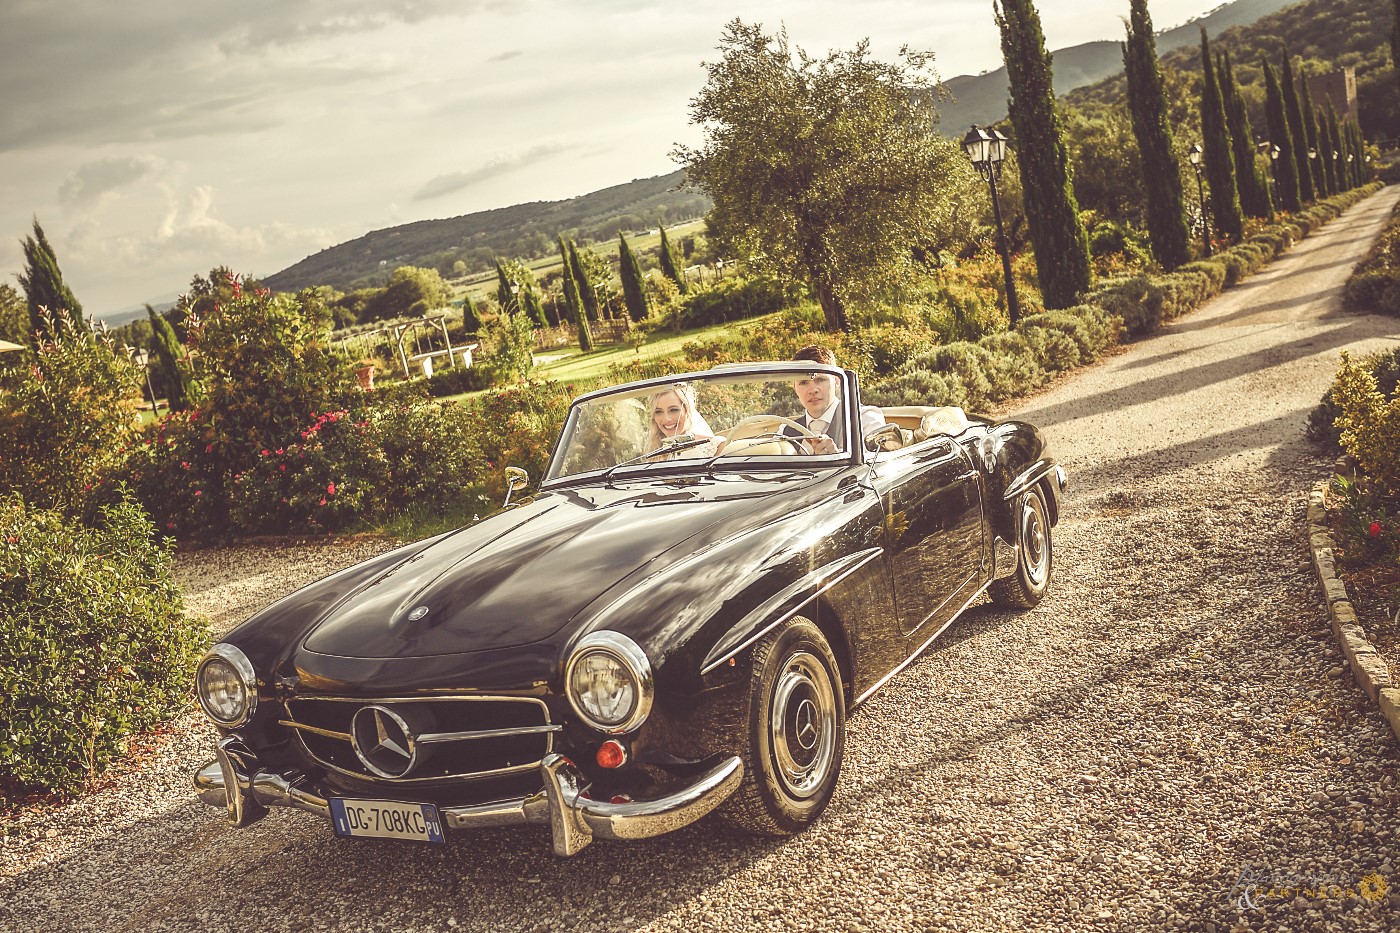 Return to the villa with our beautiful vintage Mercedes